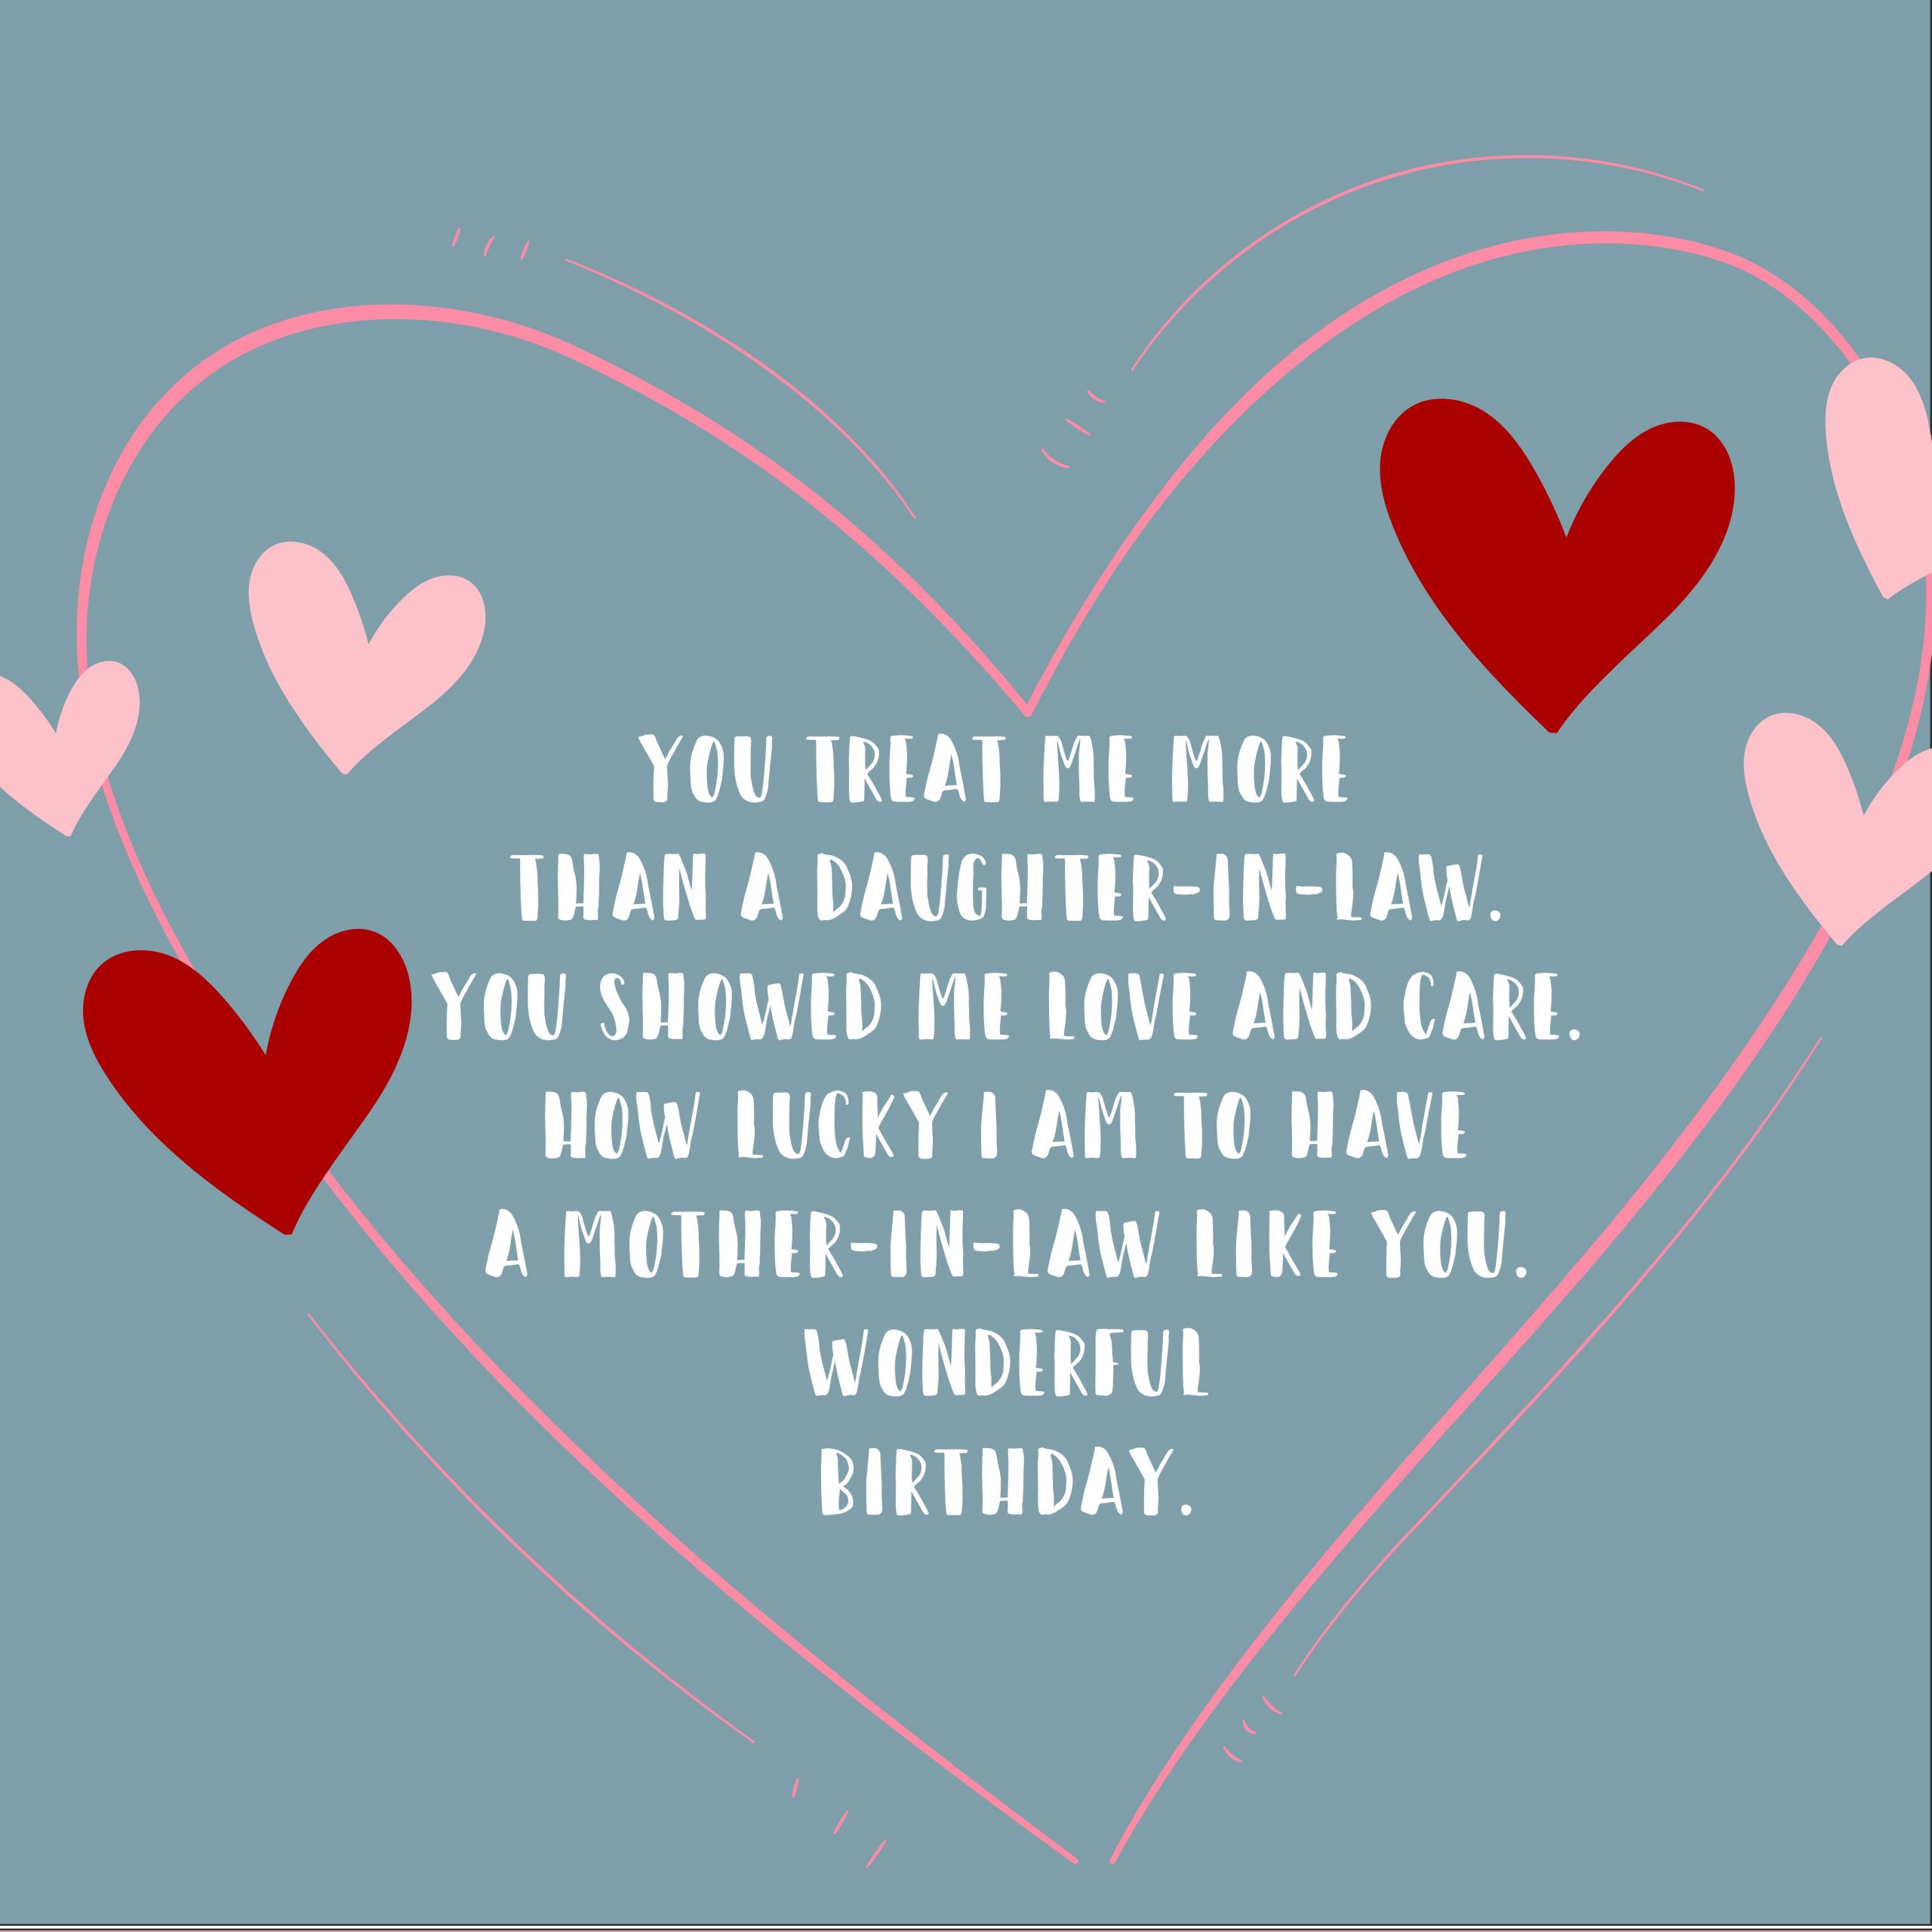 Happy Birthday Quote For Mother In Law
 The 200 Happy Birthday Mother in Law Quotes Top Happy